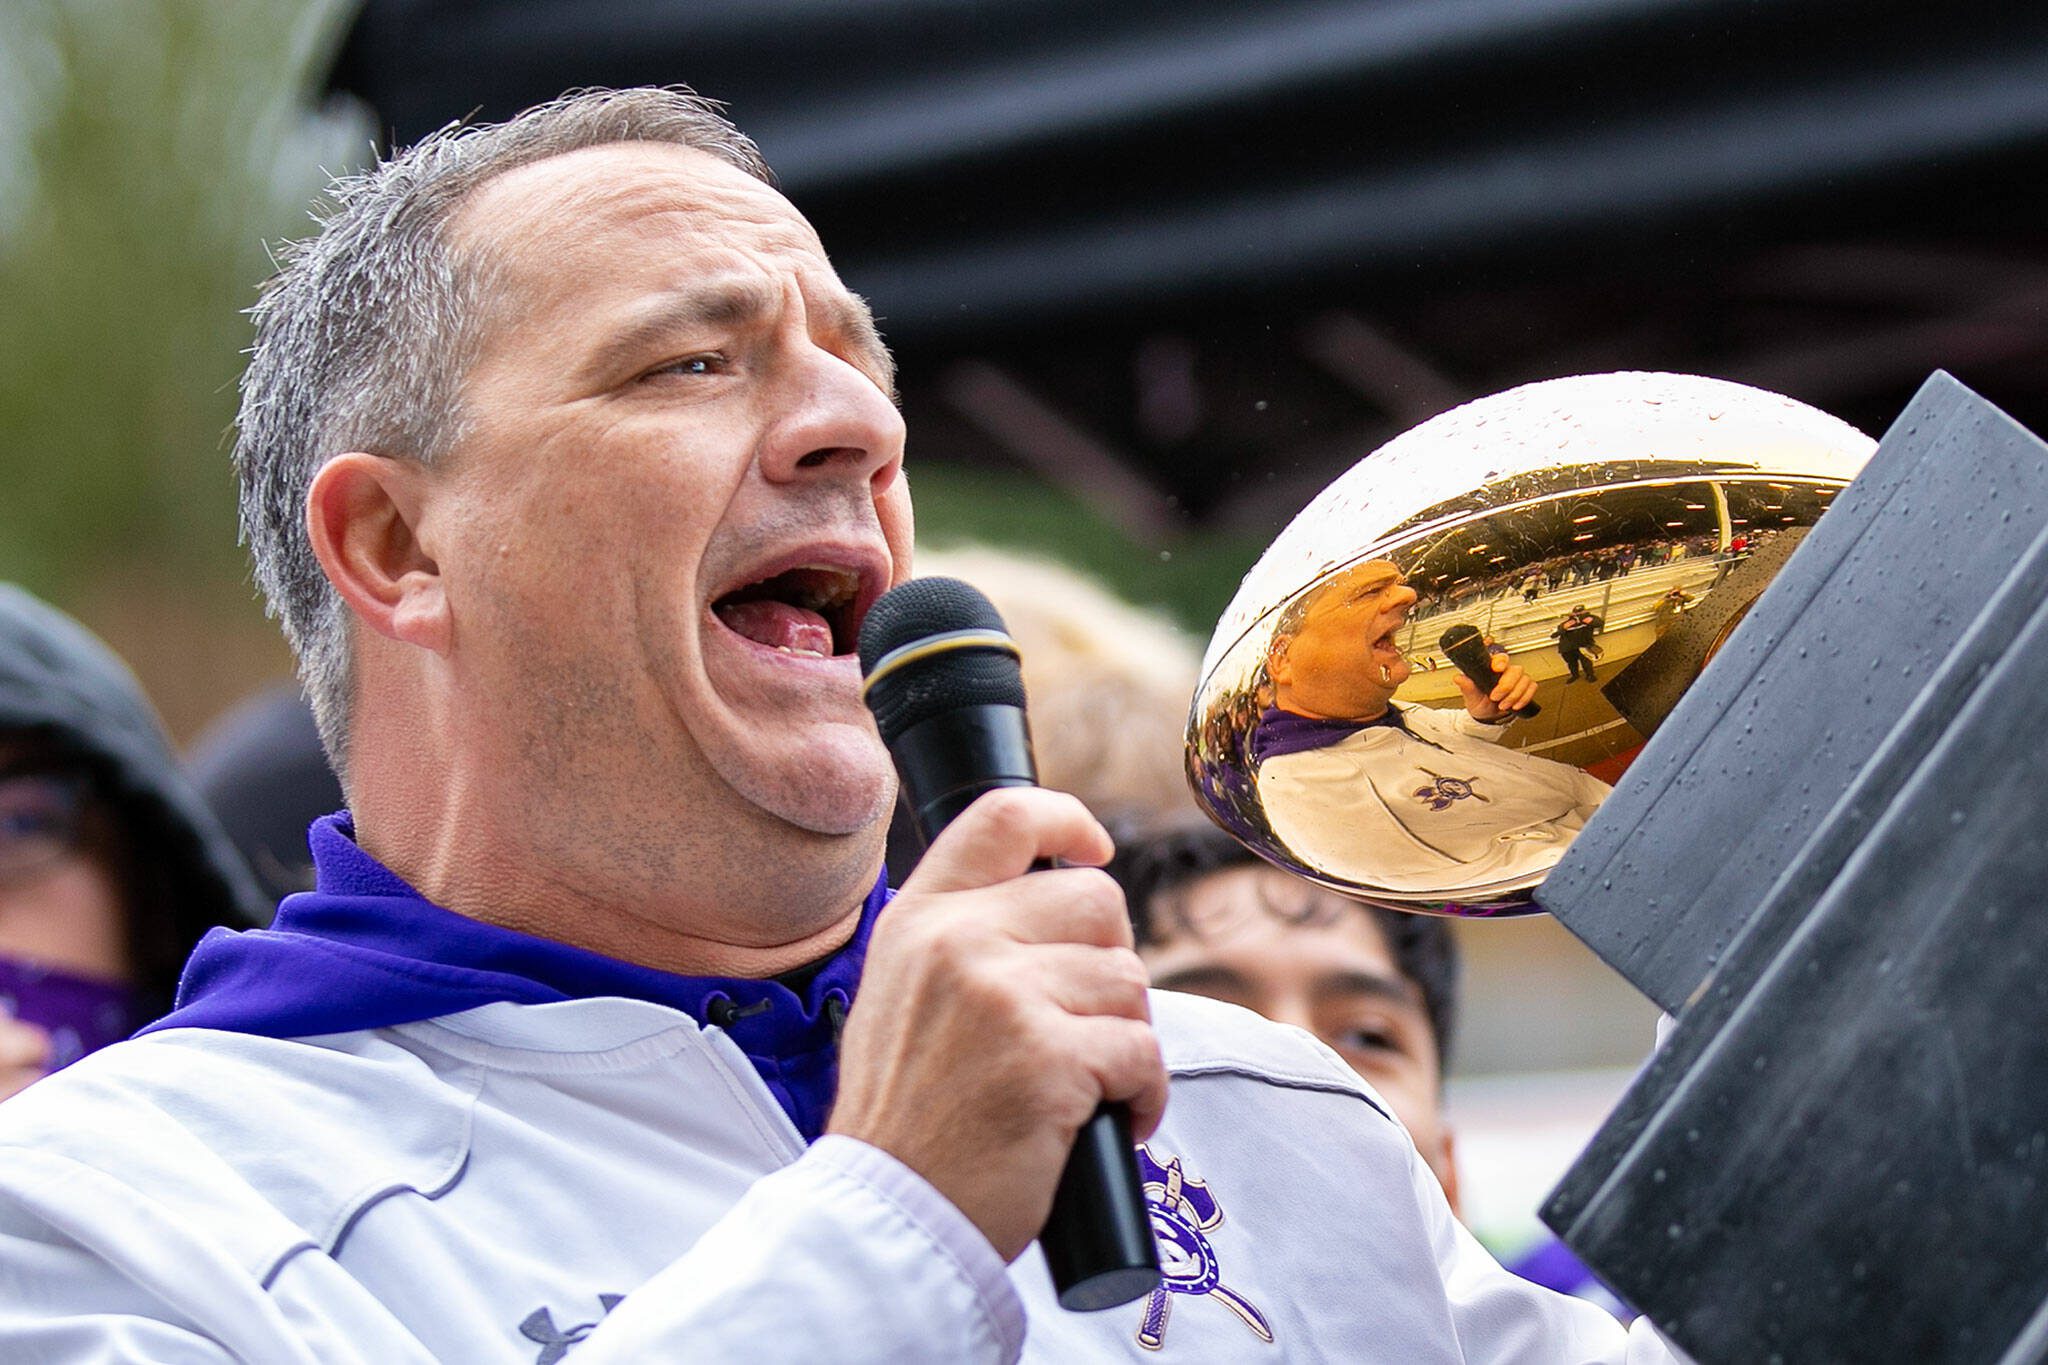 Lake Stevens football coach Tom Tri thanks the crowd during the 4A state championship celebration on Dec. 10, 2022, in Lake Stevens. (Ryan Berry / The Herald)